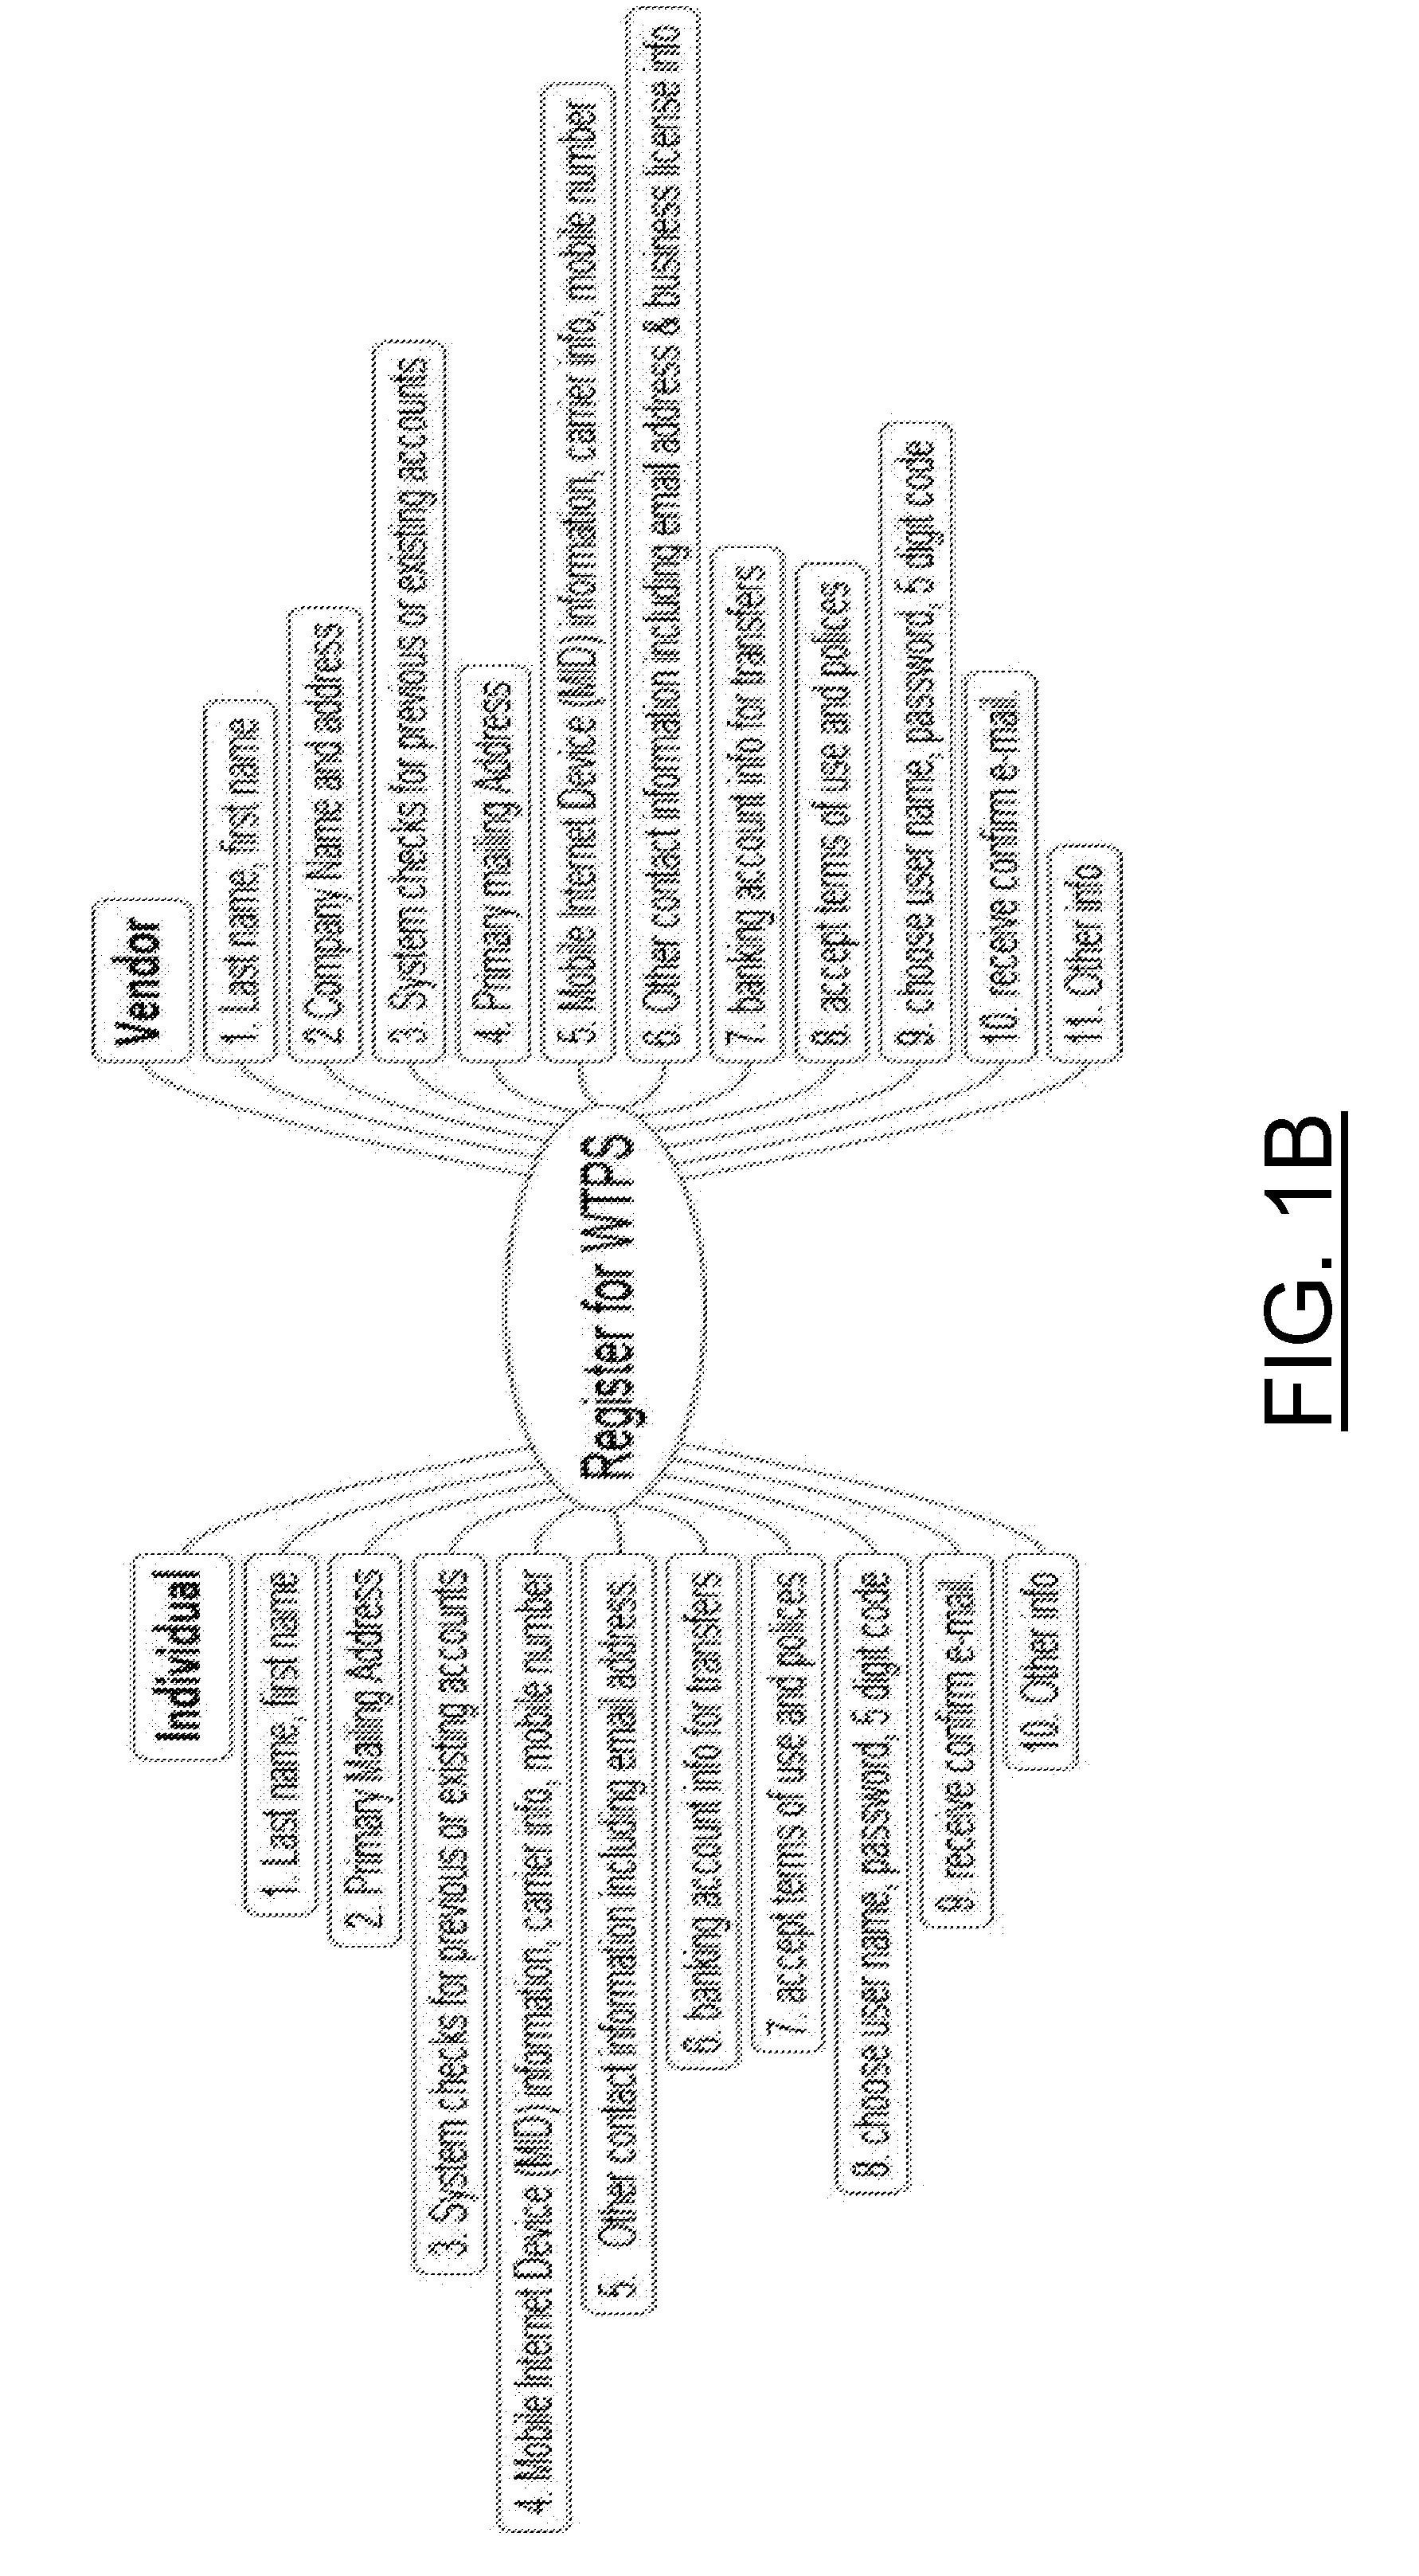 Contactless wireless transaction processing system